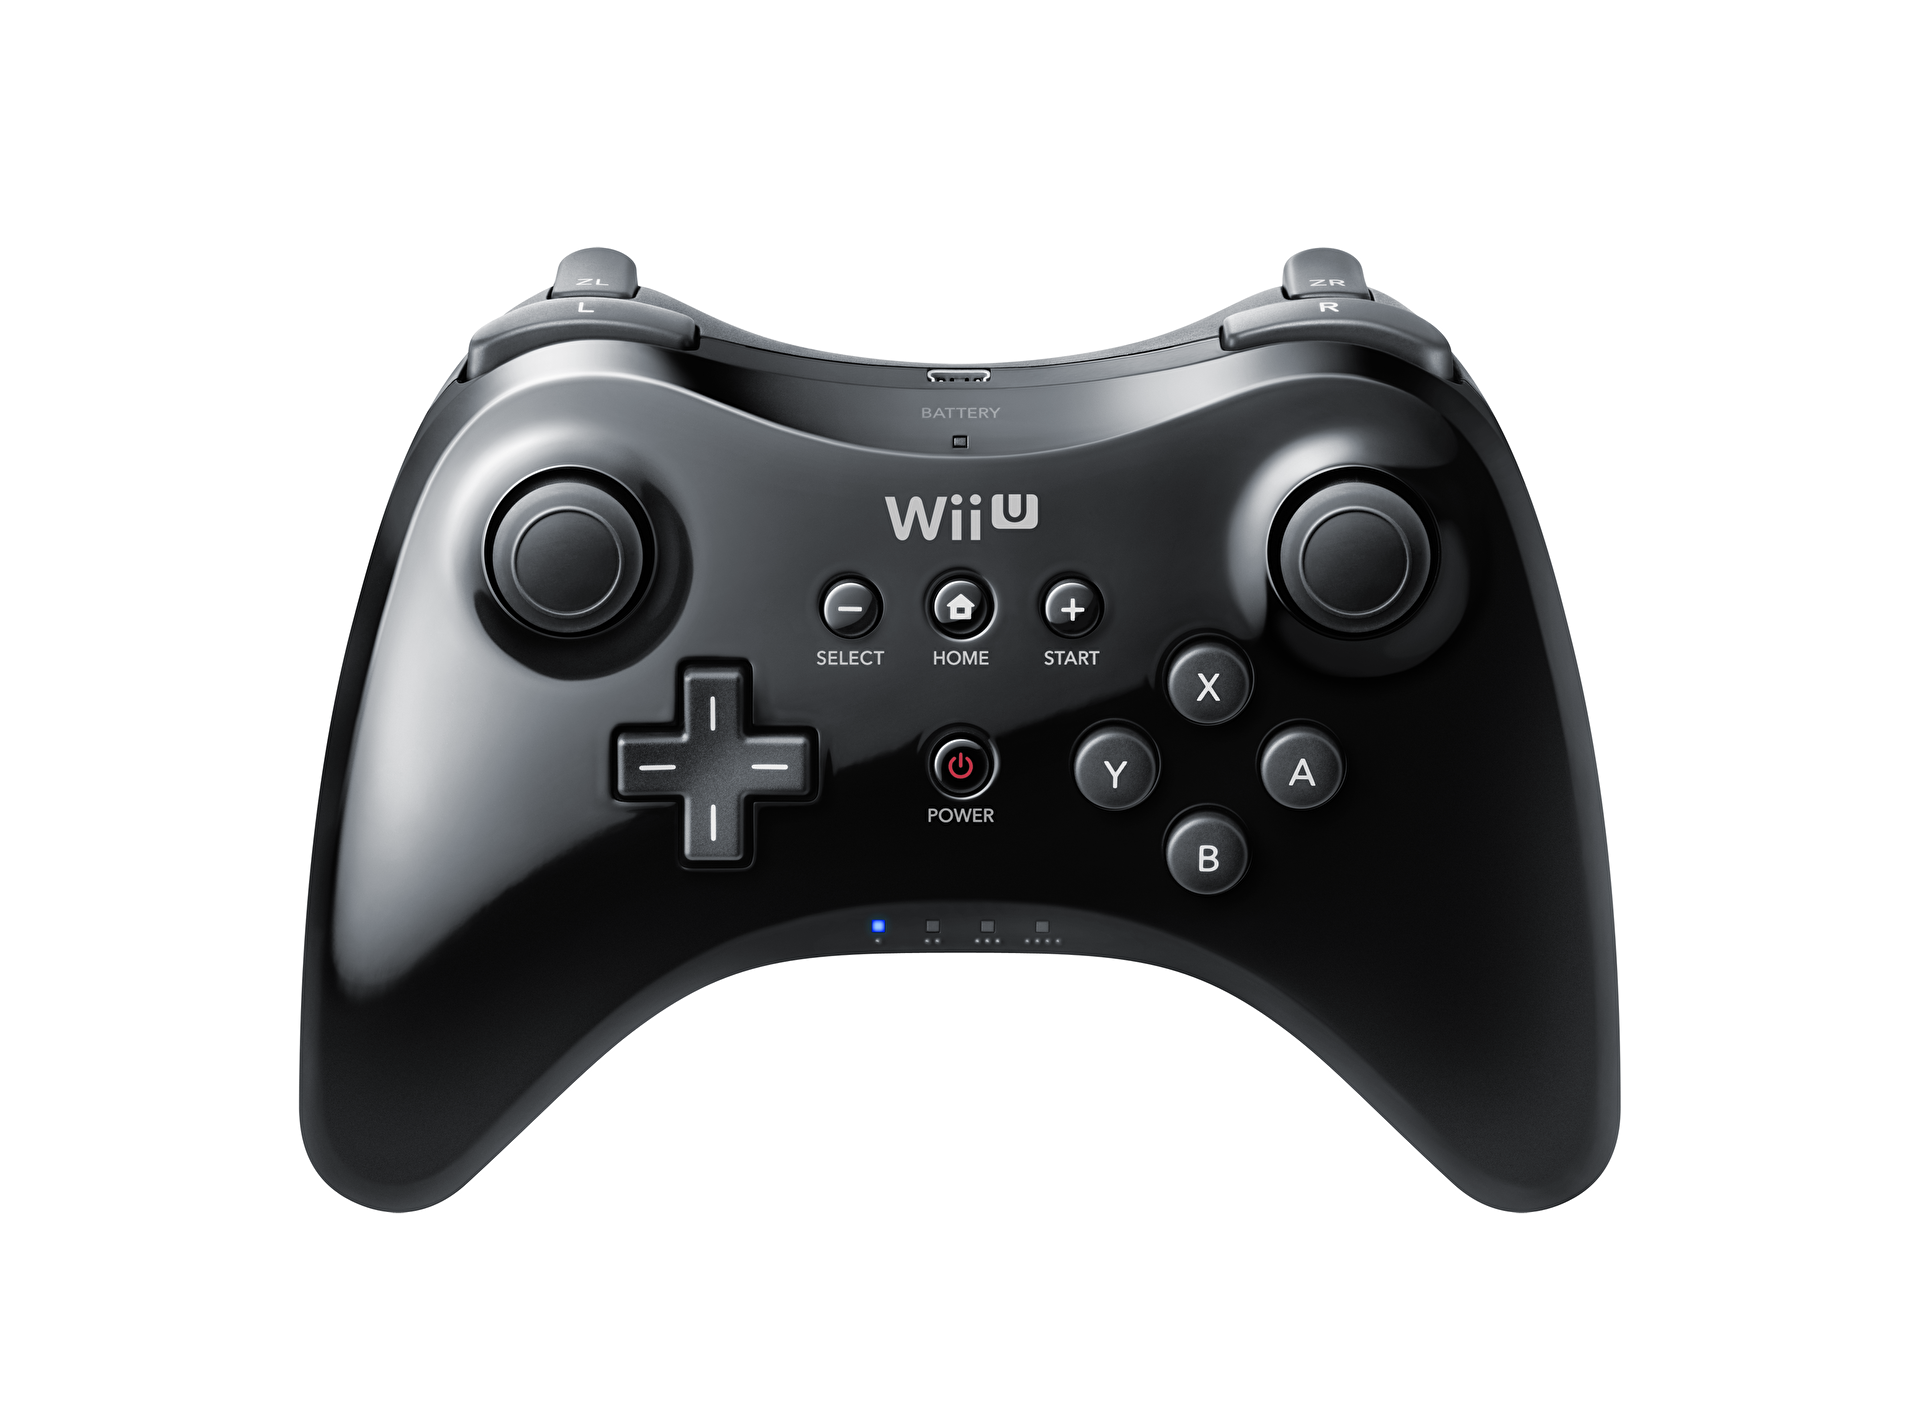 Wii U Pro Controller Now Working With PC And Mac - My Nintendo News